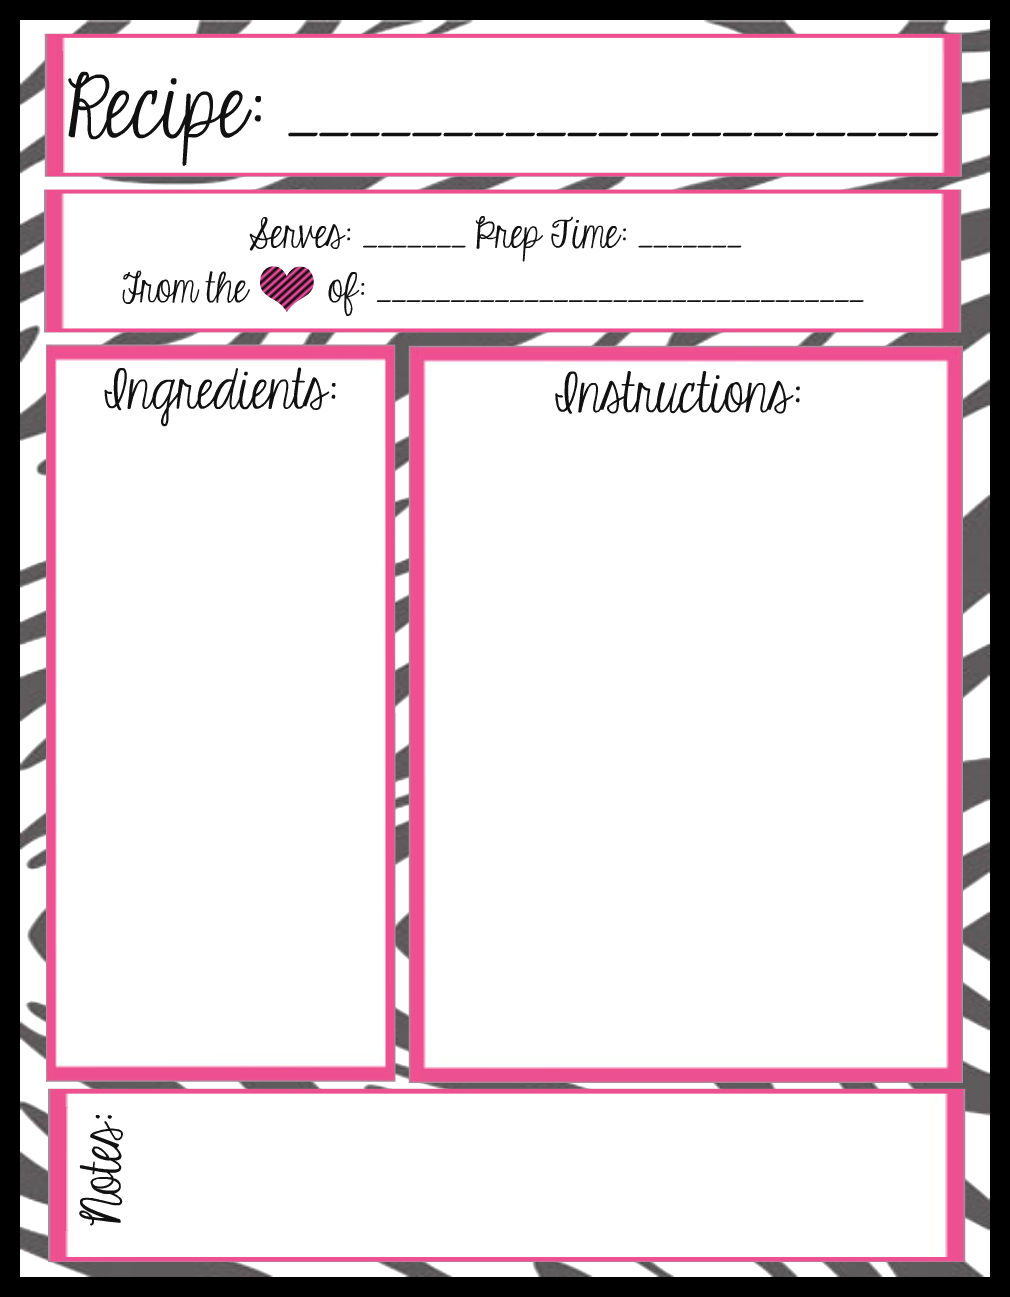 8 Best Images Of Printable Full Page Recipe Templates Free Printable Full Page Recipe